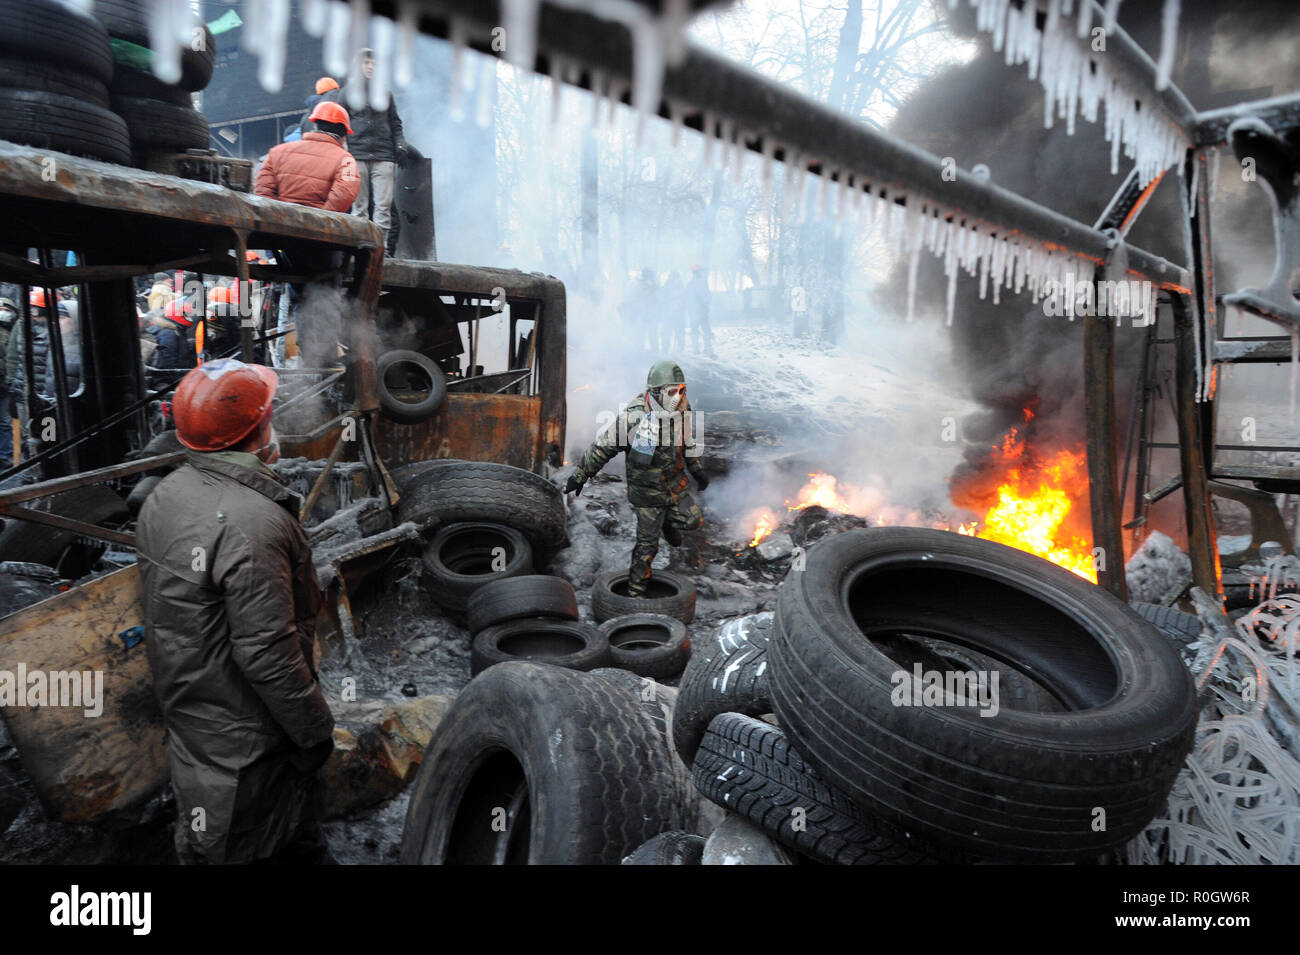 January 25, 2014 - Kiev, Ukraine: Thousands of angry anti-government protesters face riot police from their barricades near Independence Square. This part of Kiev's city center was devastated after heavy clashes between protesters burning tires and police forces using water cannon in freezing temperatures Protesters have built barricades to prevent police from storming Maidan, Kiev's independence square, the epicenter of the anti-government revolt. Des barricades sont erigees dans un climat glacial dans le centre de Kiev, a proximite du Maidan, la place de l'Independance, qui est devenue l'epi Stock Photo